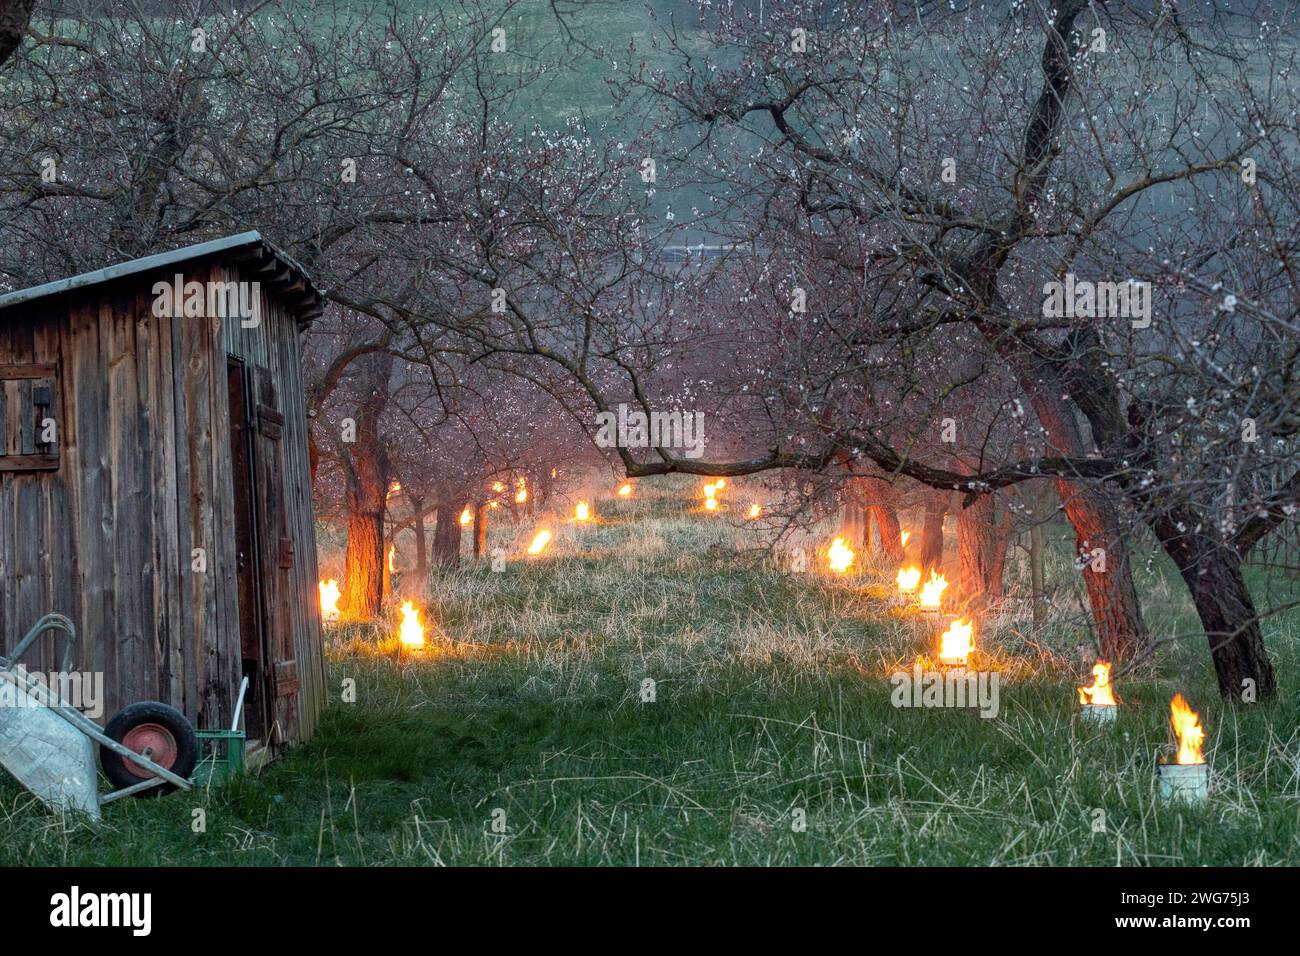 Heater Candles To Protect The Wachauer Marillenblüte From The Night Frost, NÖ, Austria Stock Photo